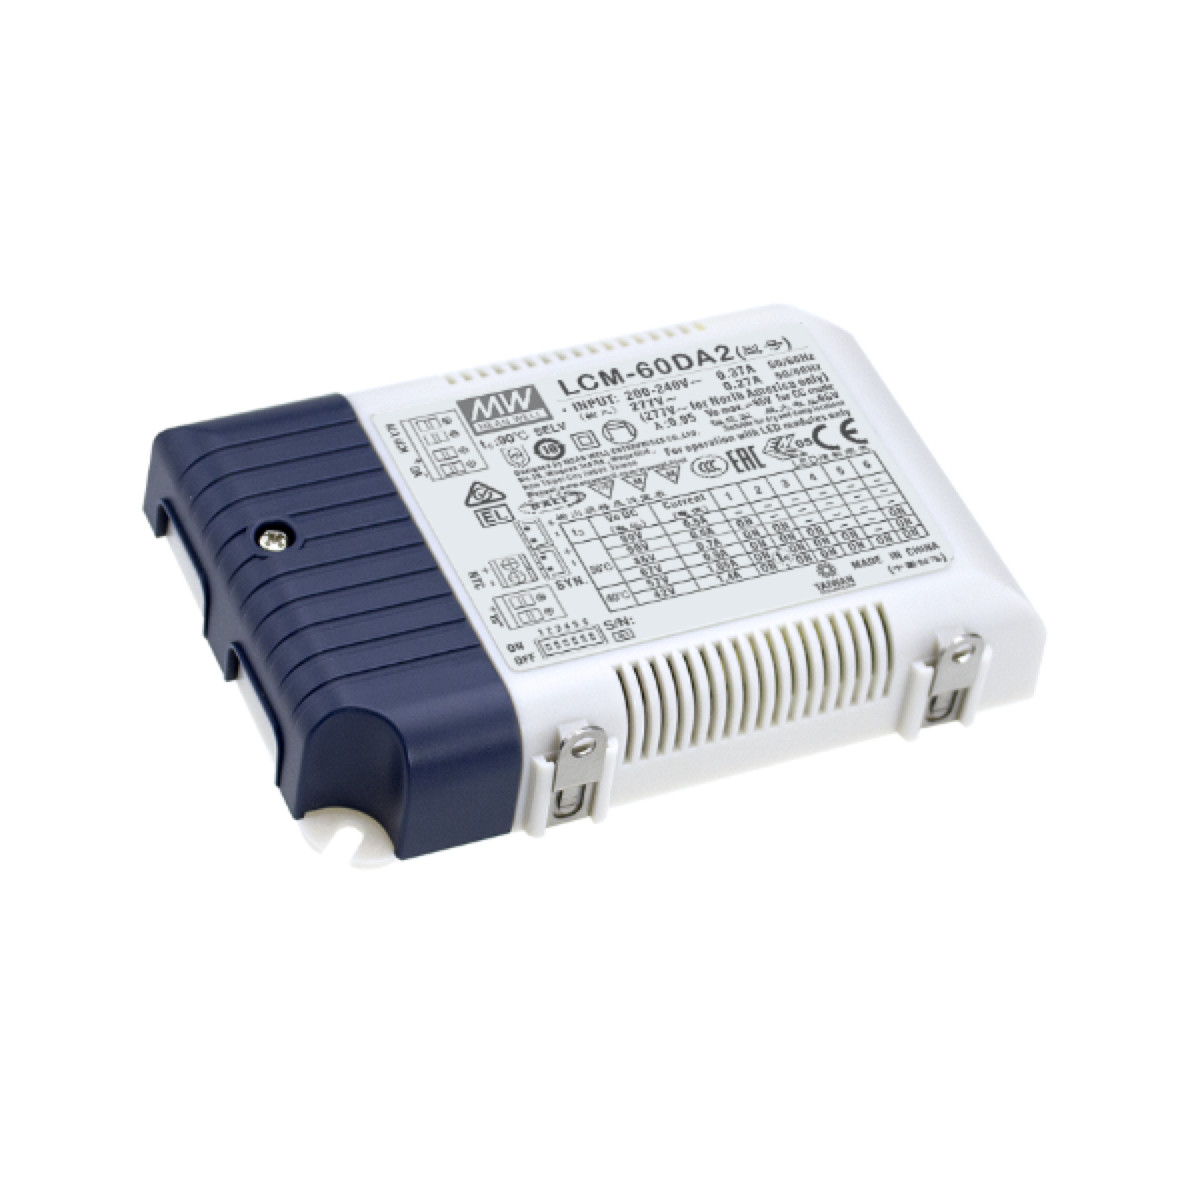 MEANWELL 60w 2-90V 500mA-1400mA Constant Current DALI-2 Dimmable LED Driver -LCM-60DA2